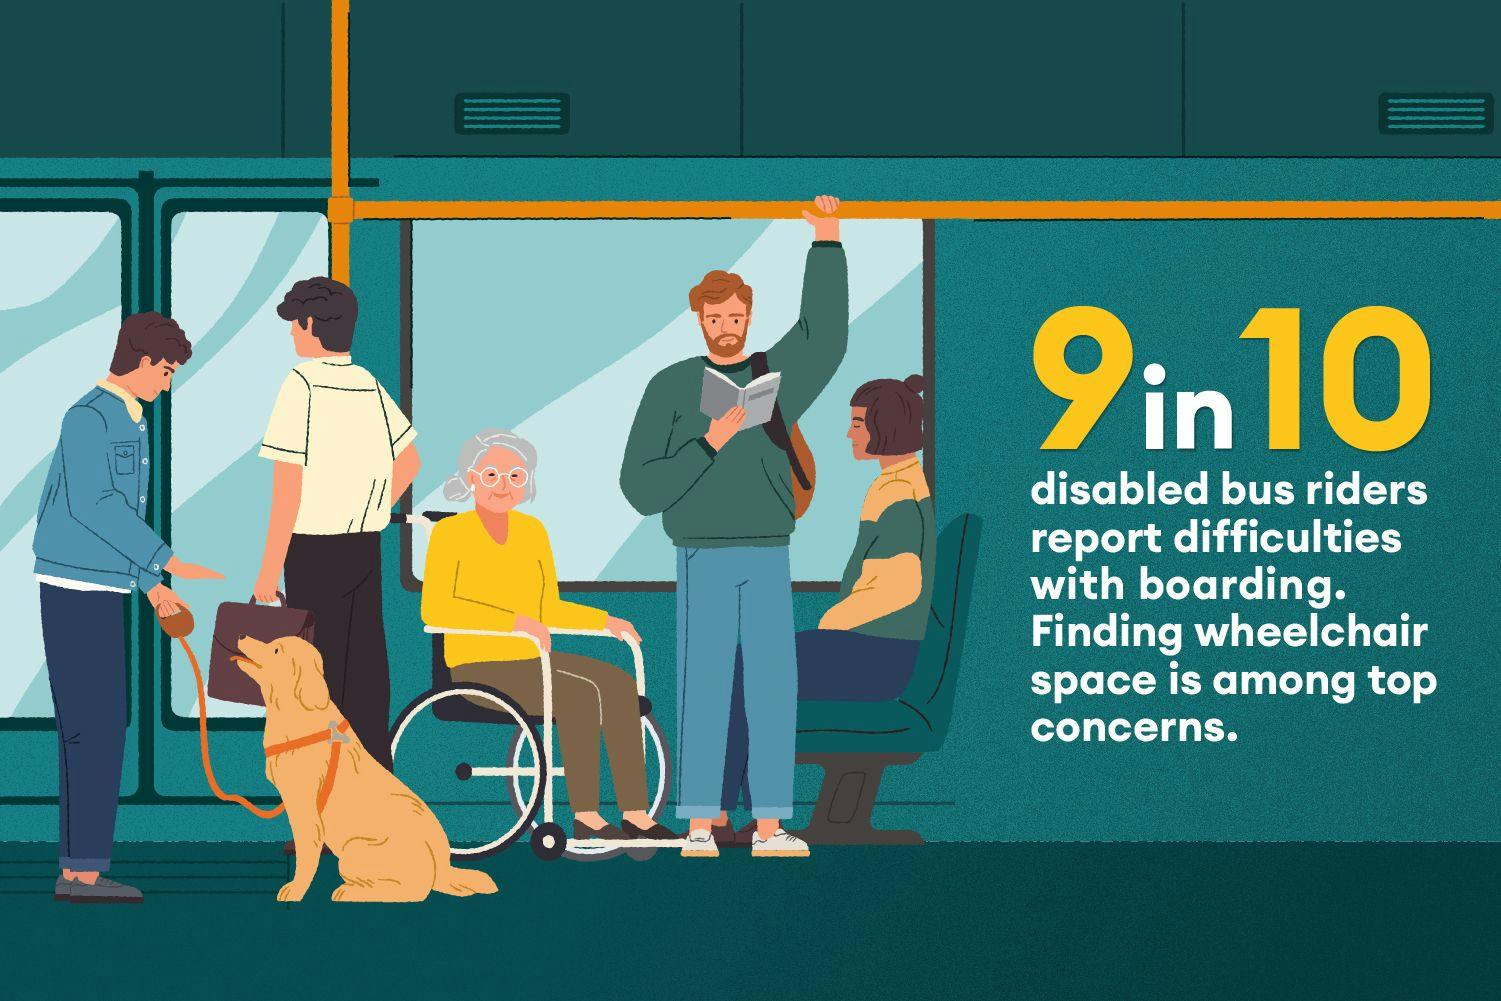 9 in 10 disabled bus riders report difficulties with boarding. Finding wheelchair space is among top concerns.